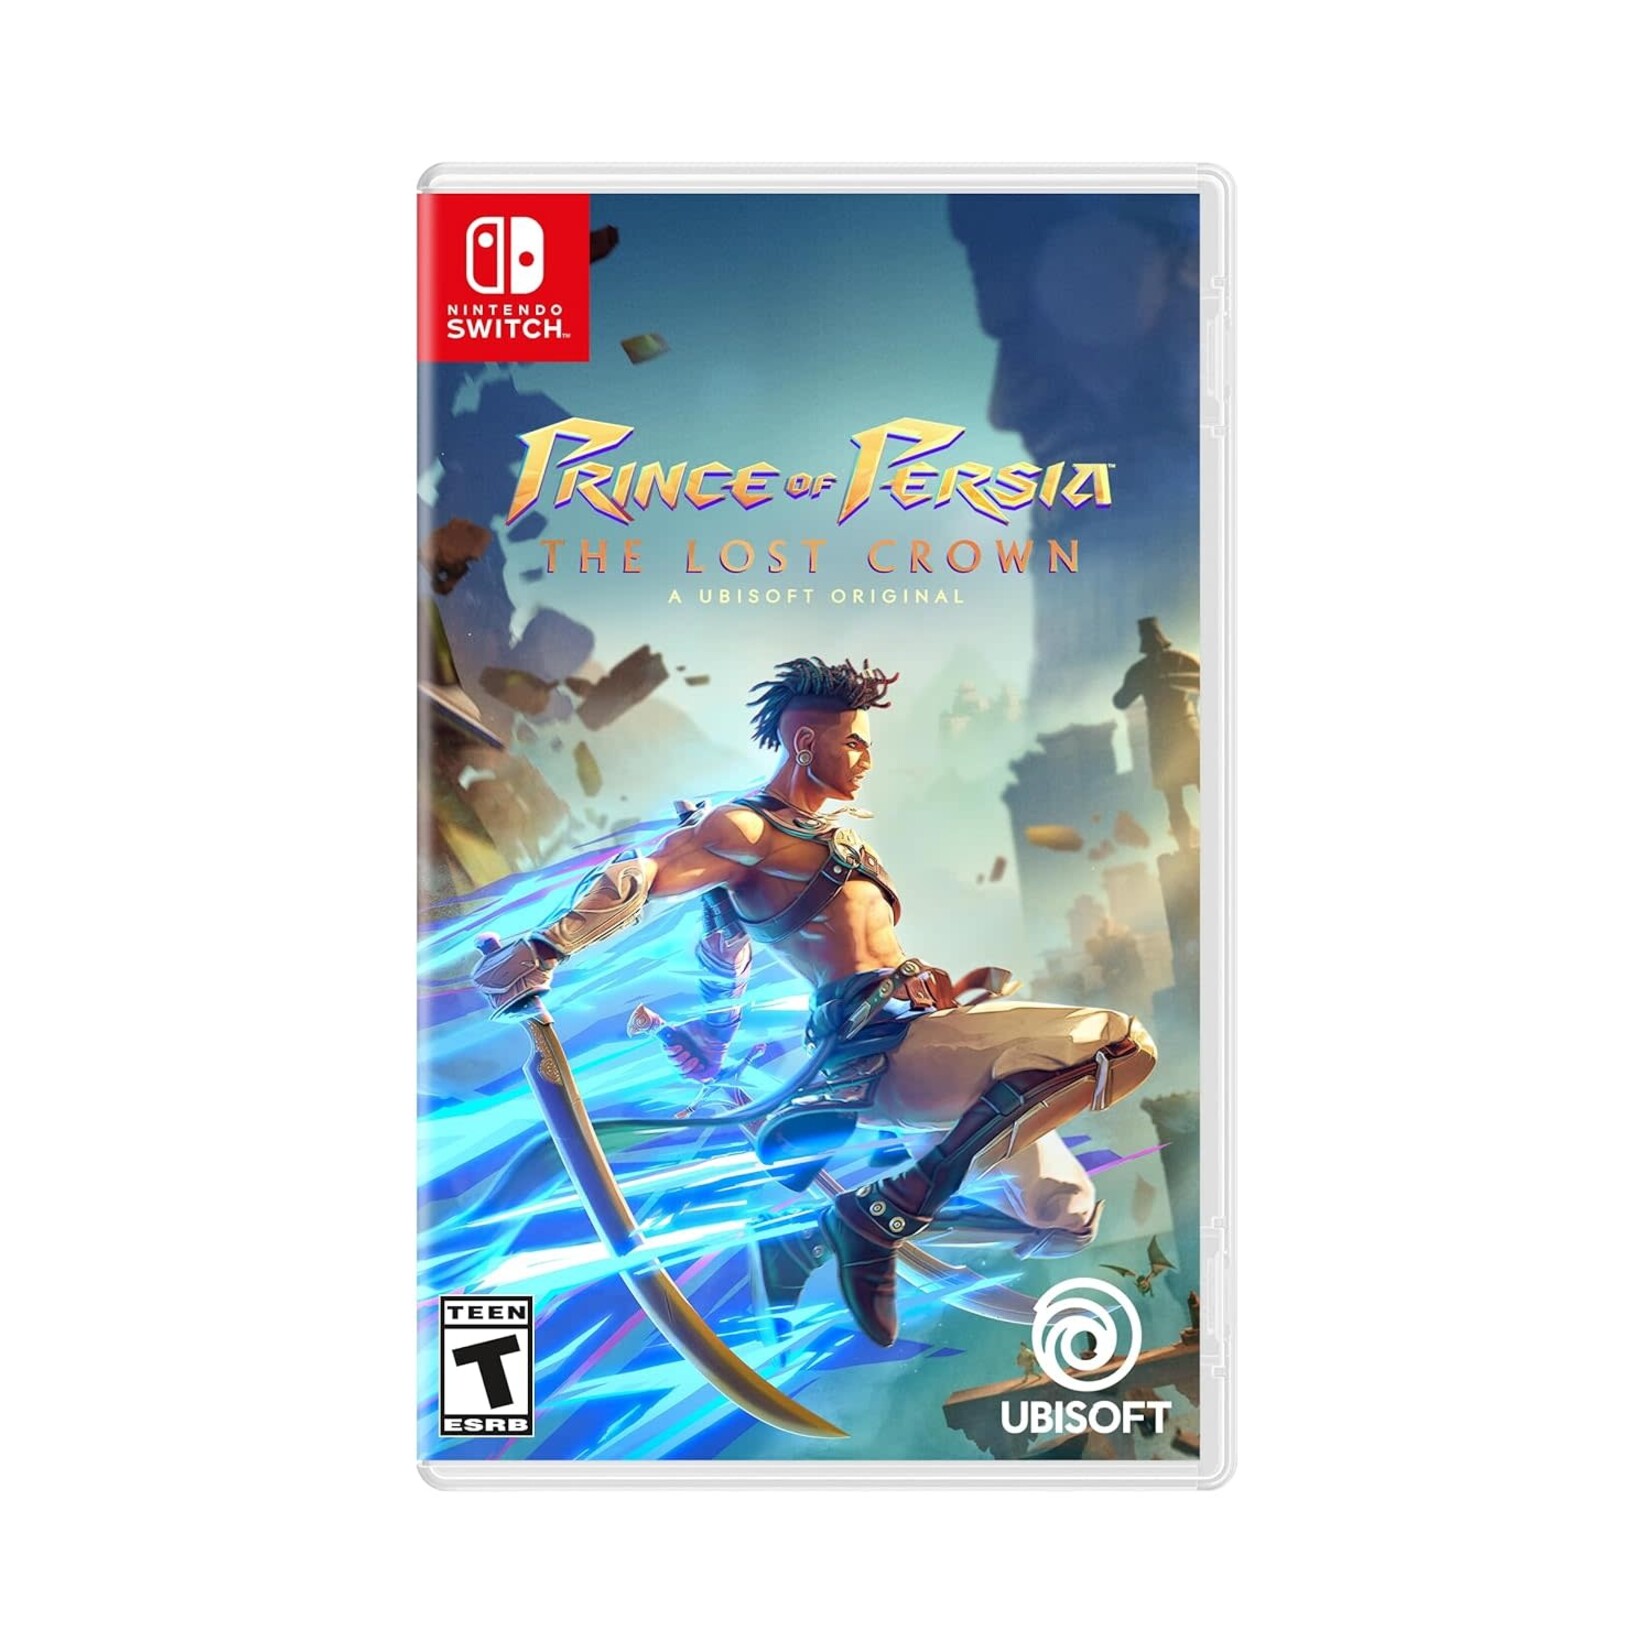 SWITCH-Prince of Persia: The Lost Crown